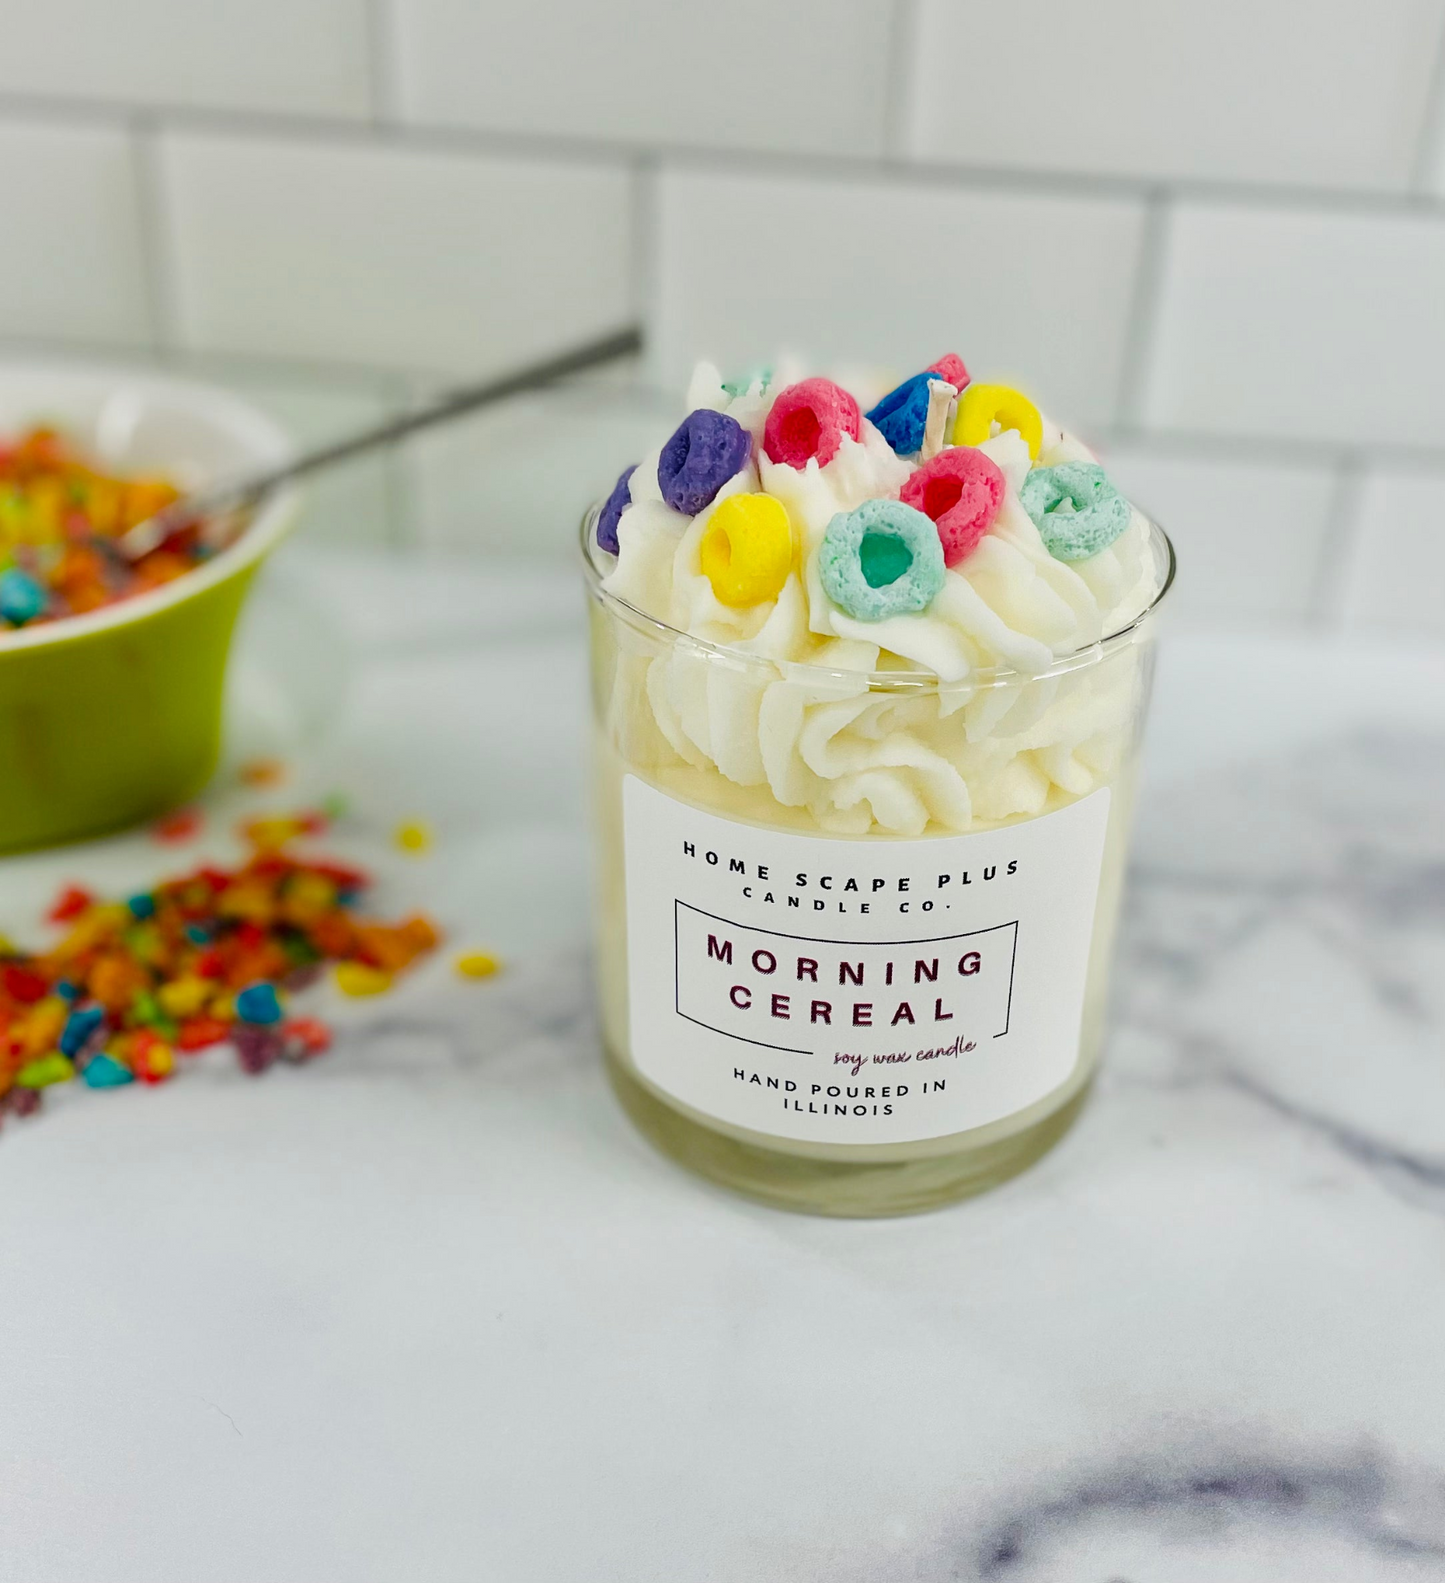 Soy Wax Candle Morning Cereal